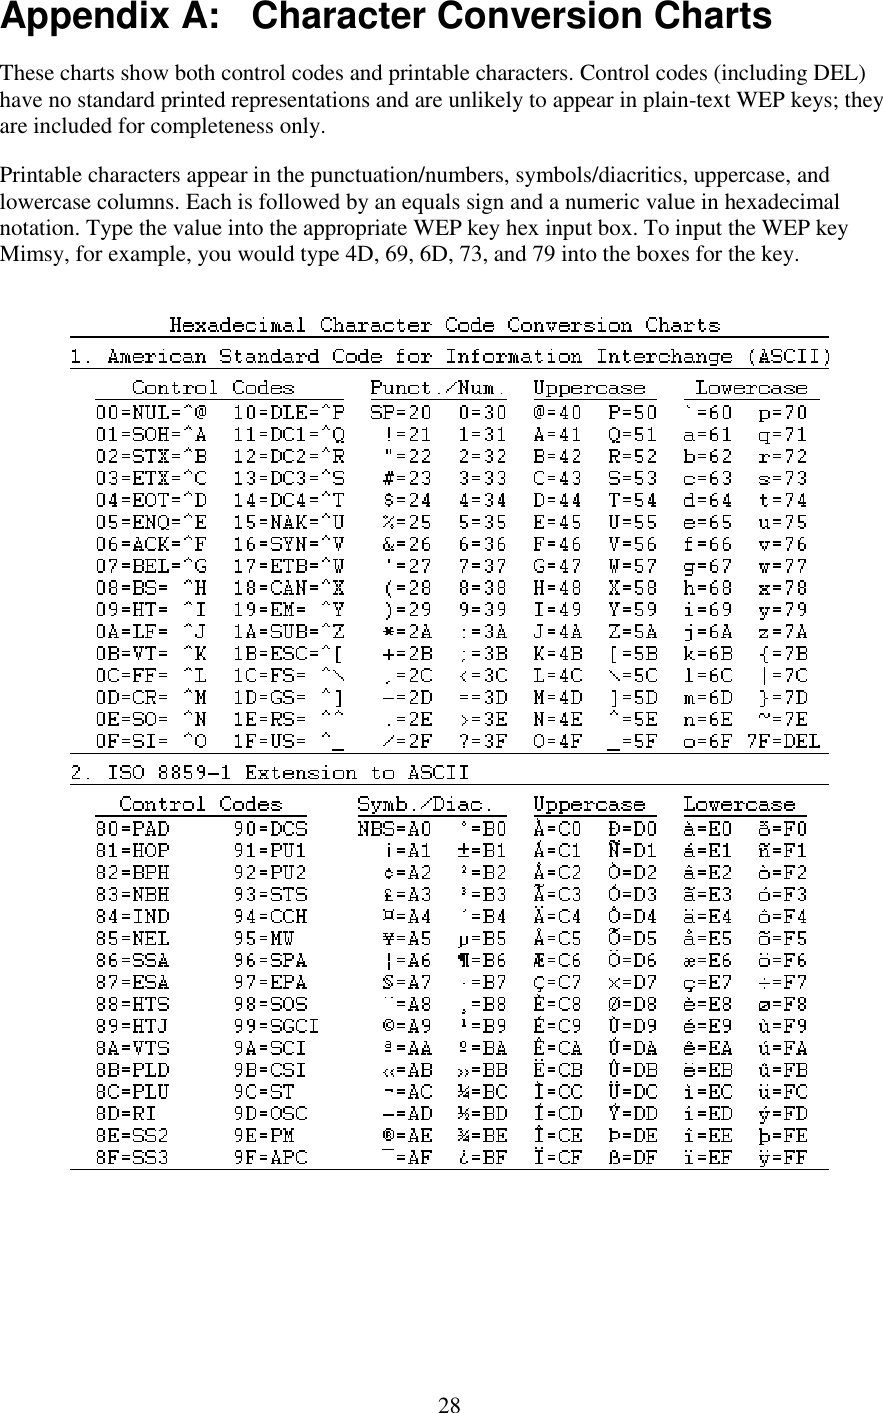   28 Appendix A:   Character Conversion Charts These charts show both control codes and printable characters. Control codes (including DEL) have no standard printed representations and are unlikely to appear in plain-text WEP keys; they are included for completeness only. Printable characters appear in the punctuation/numbers, symbols/diacritics, uppercase, and lowercase columns. Each is followed by an equals sign and a numeric value in hexadecimal notation. Type the value into the appropriate WEP key hex input box. To input the WEP key Mimsy, for example, you would type 4D, 69, 6D, 73, and 79 into the boxes for the key.   